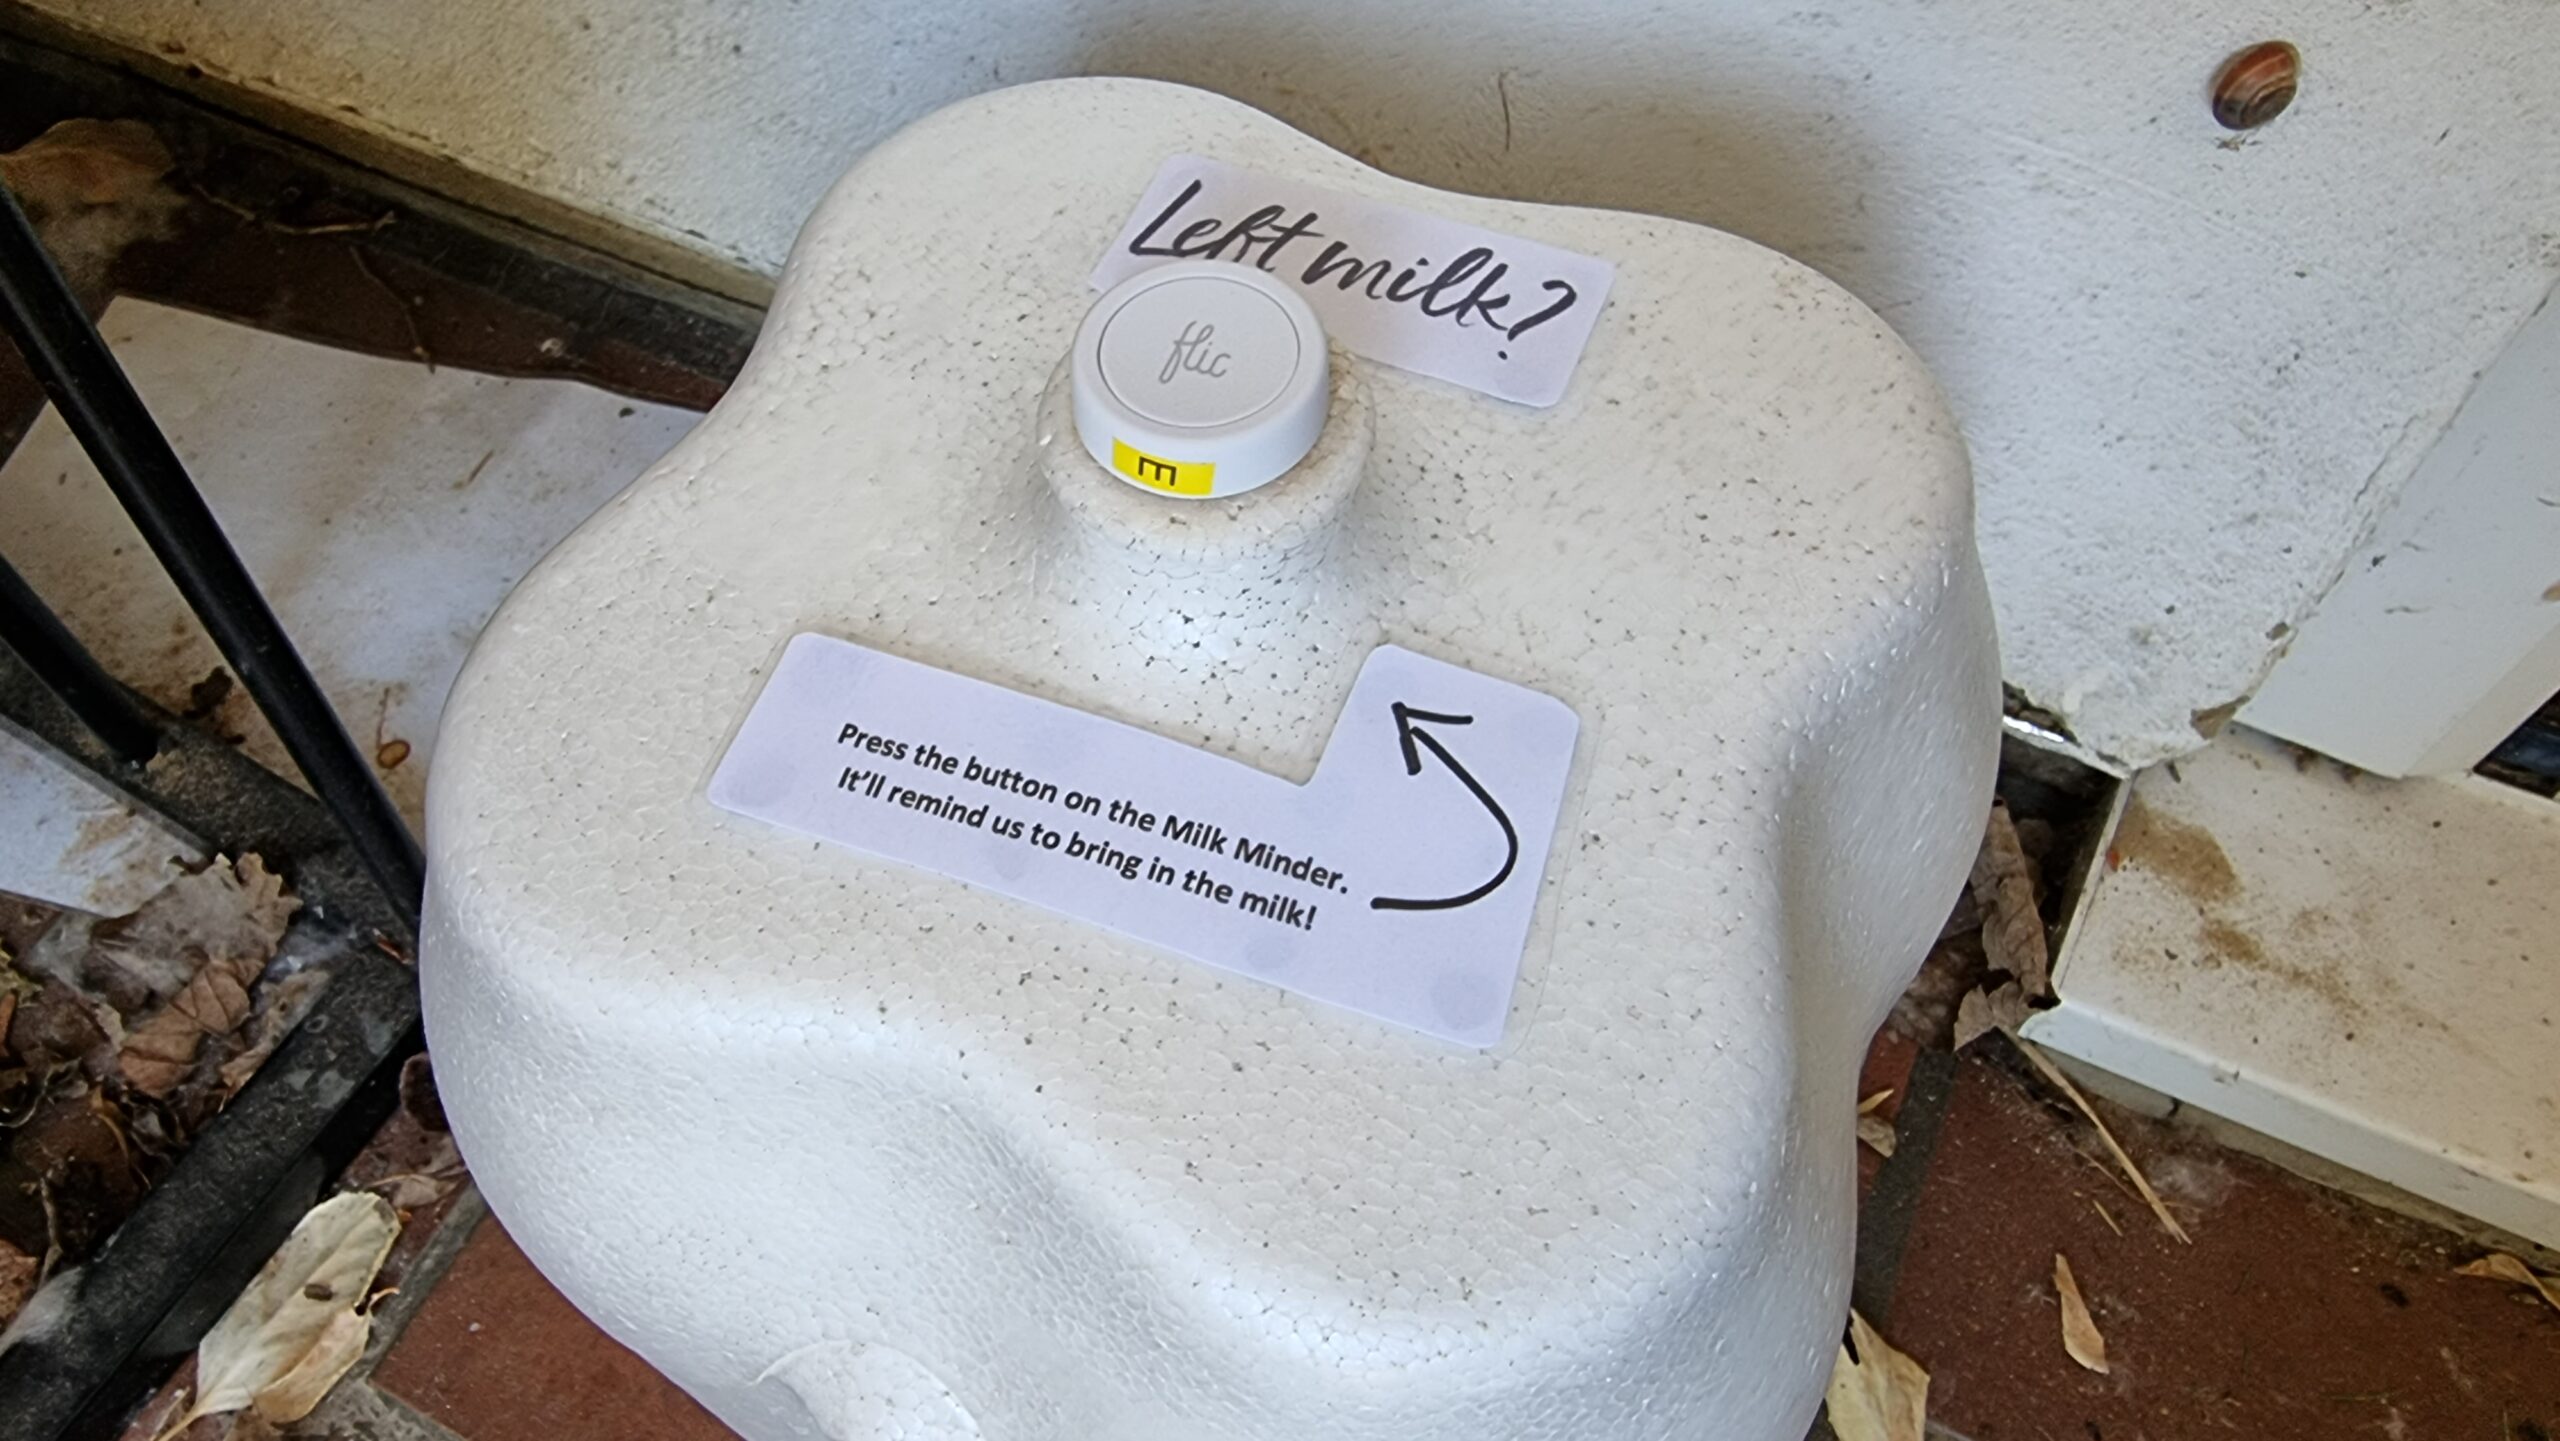 Milk container, with a Flic 2 button attached to the handle of the lid and a laminated notice attached, reading: "Left milk? Press the button on the Milk Minder. It'll remind us to bring in the milk!"